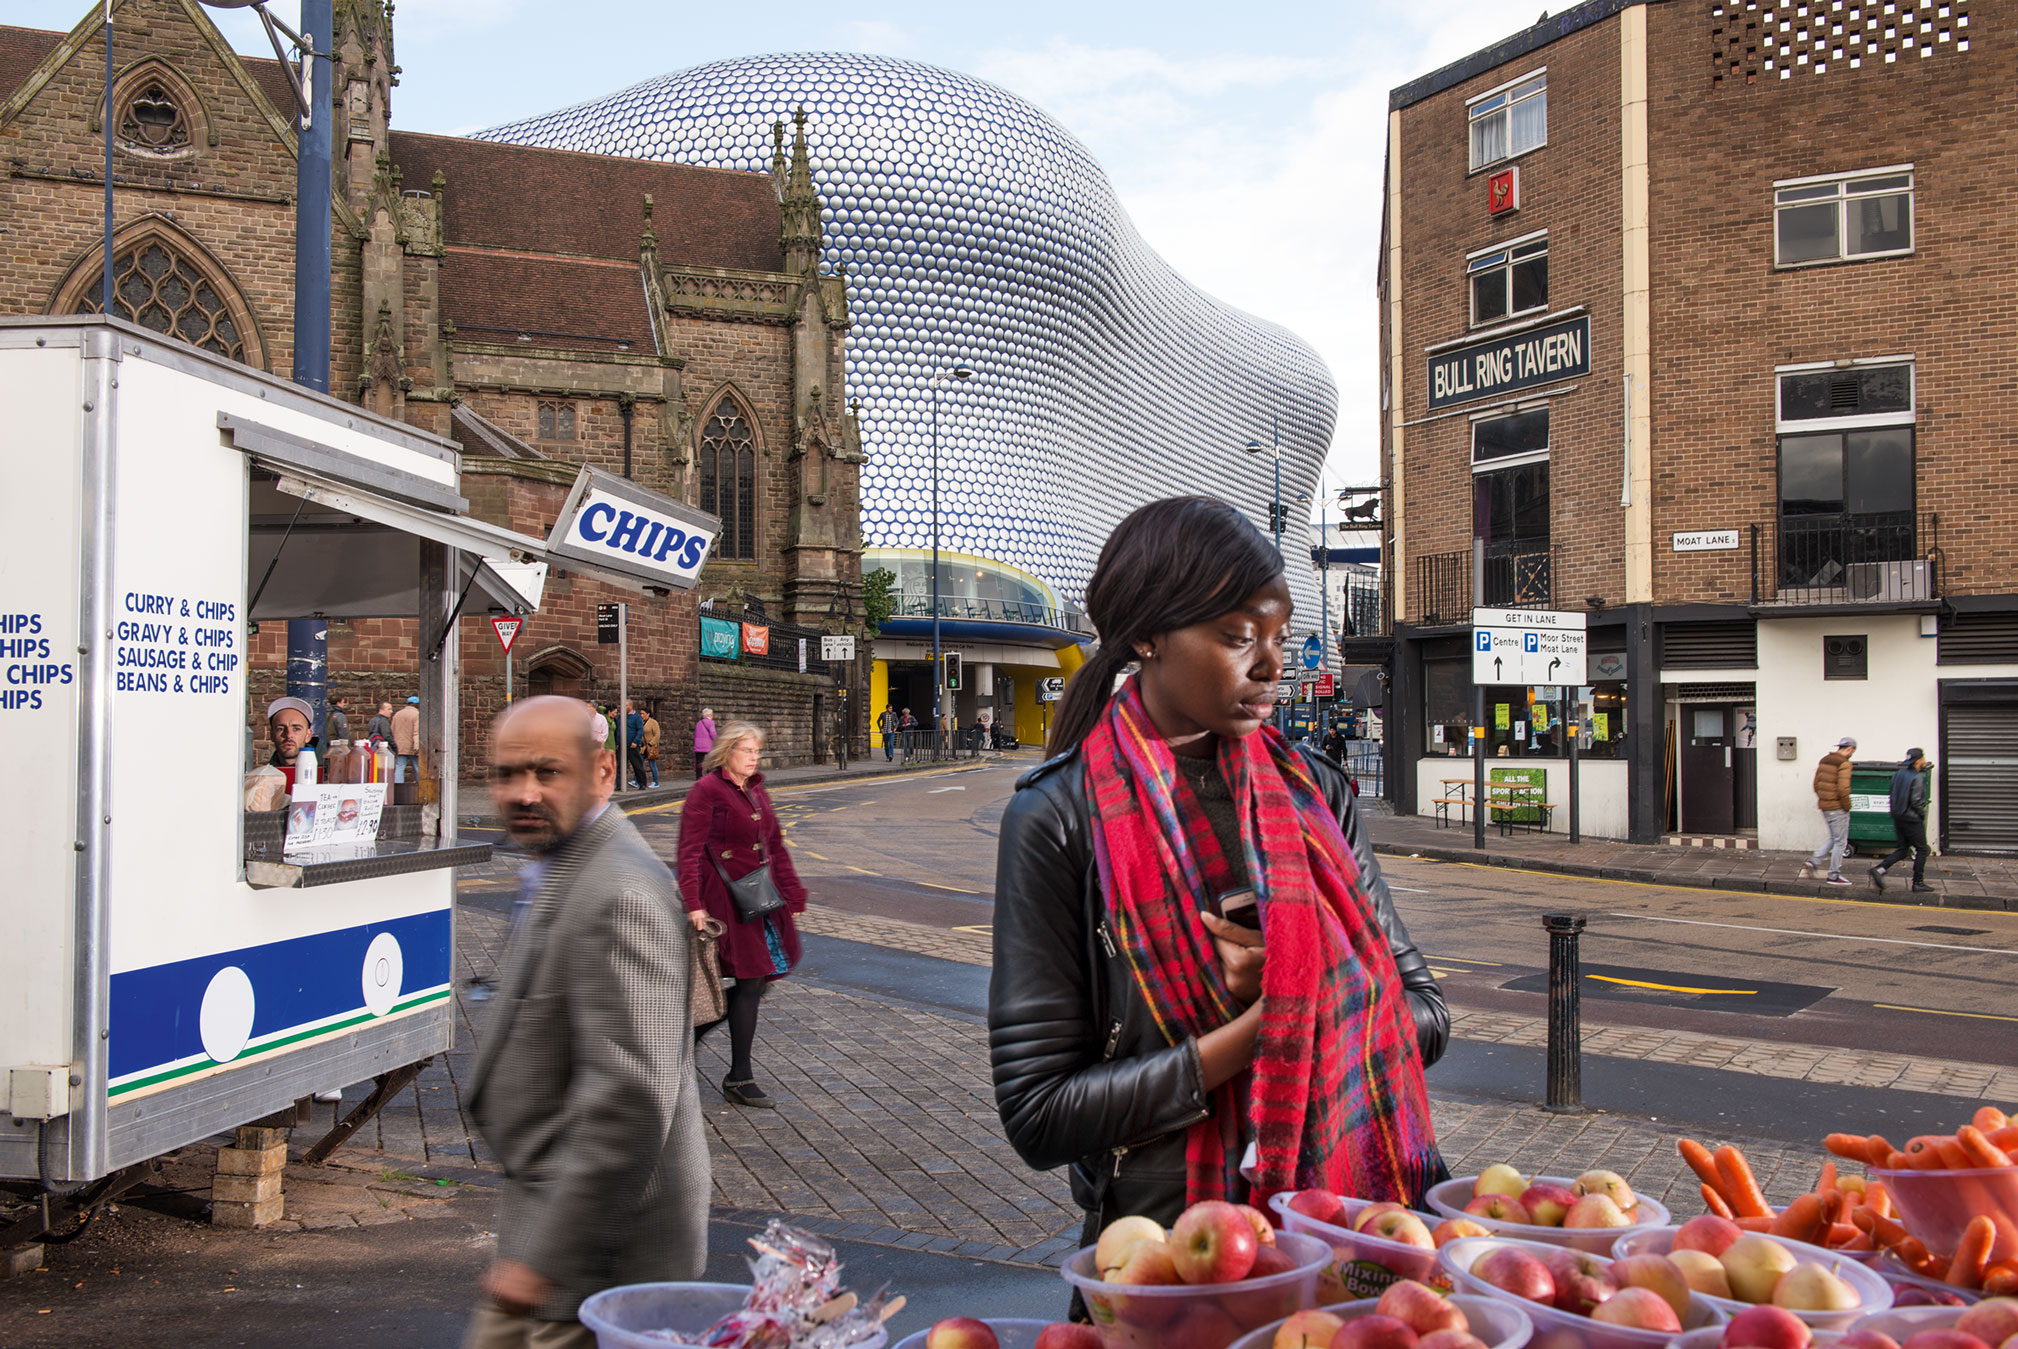 A market scene in Birmingham with a mixture of old and new building styles in the background.